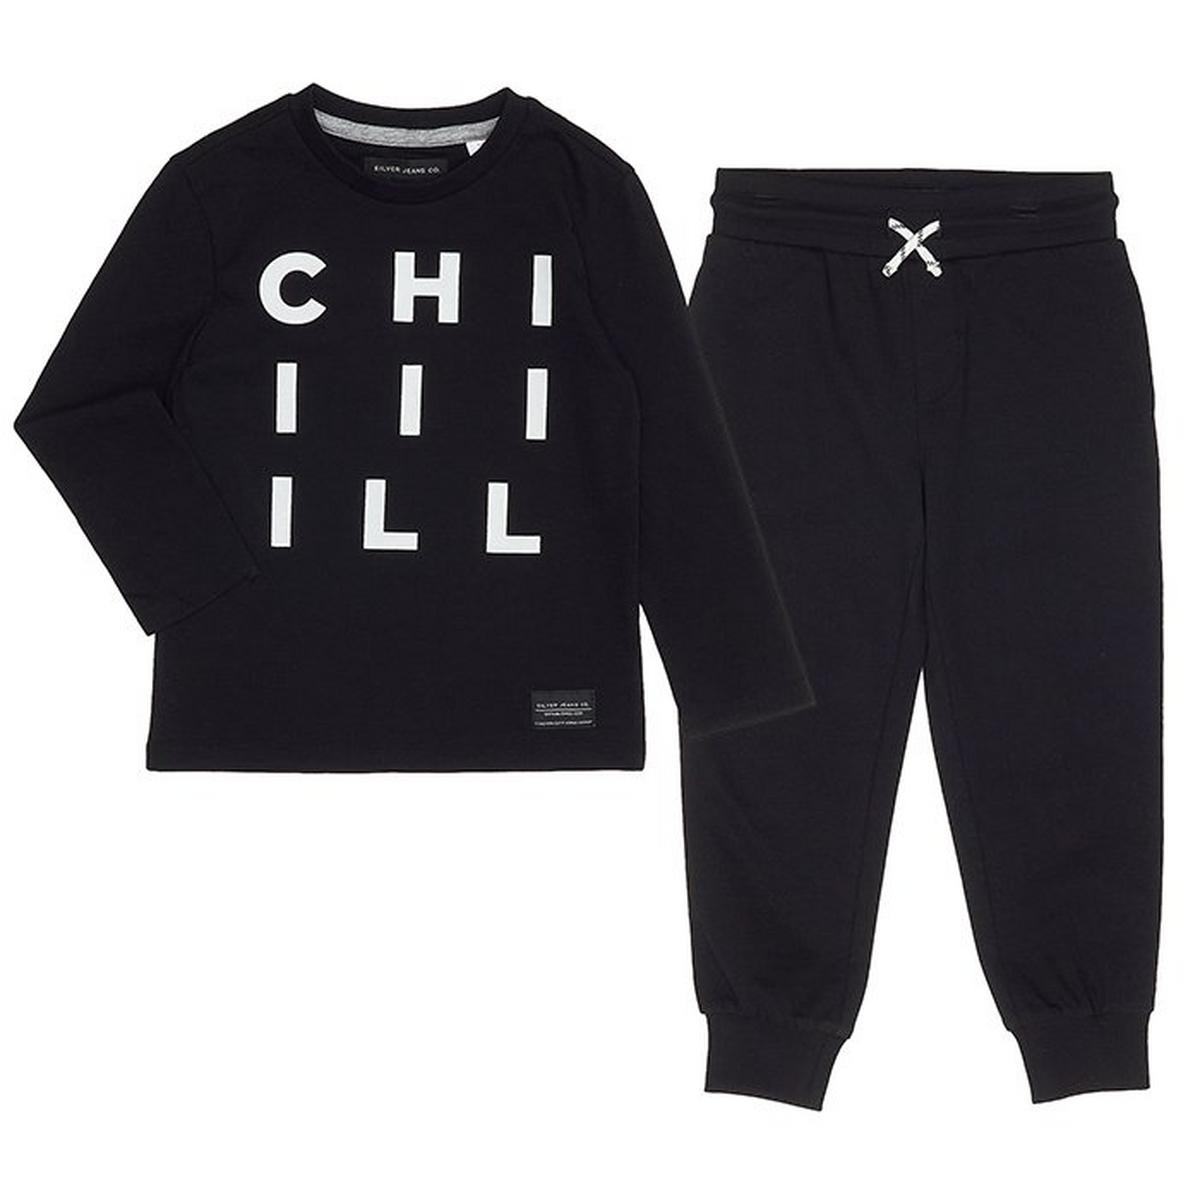 Boys' [2-4] Chill T-Shirt + Pant Two-Piece Set